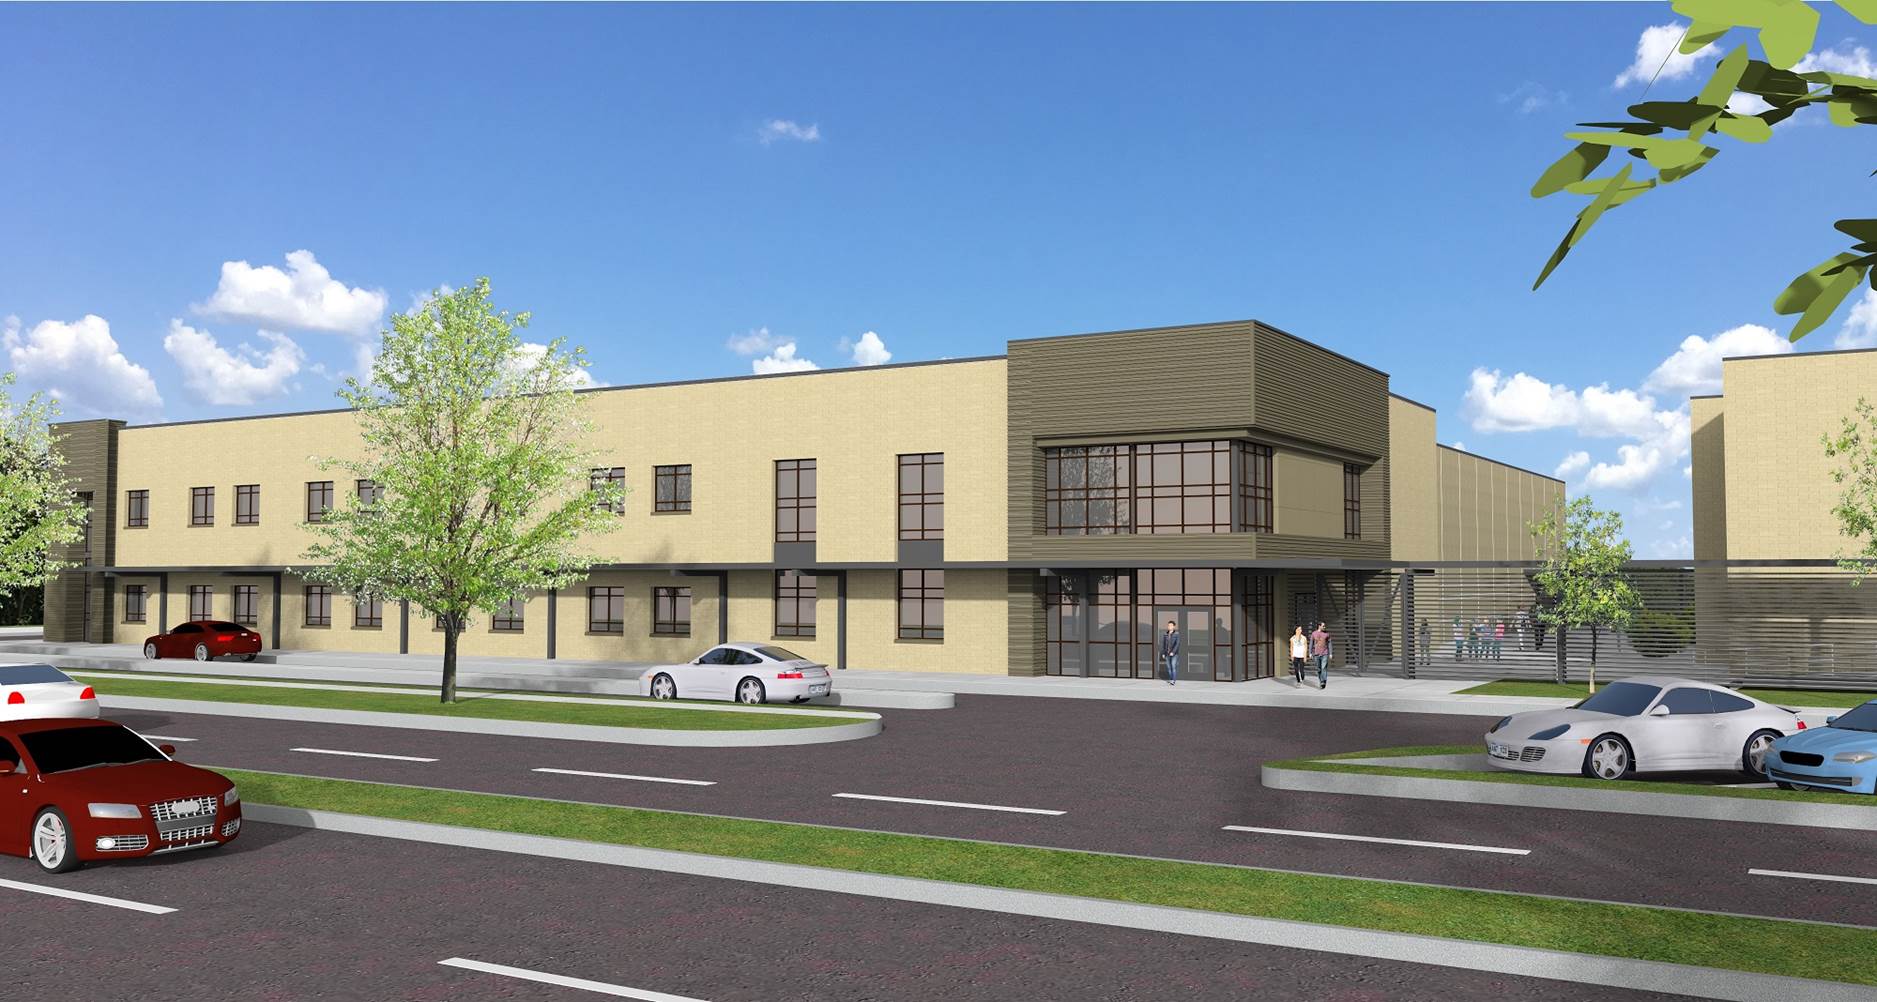 Another view of the renderized version of the school building